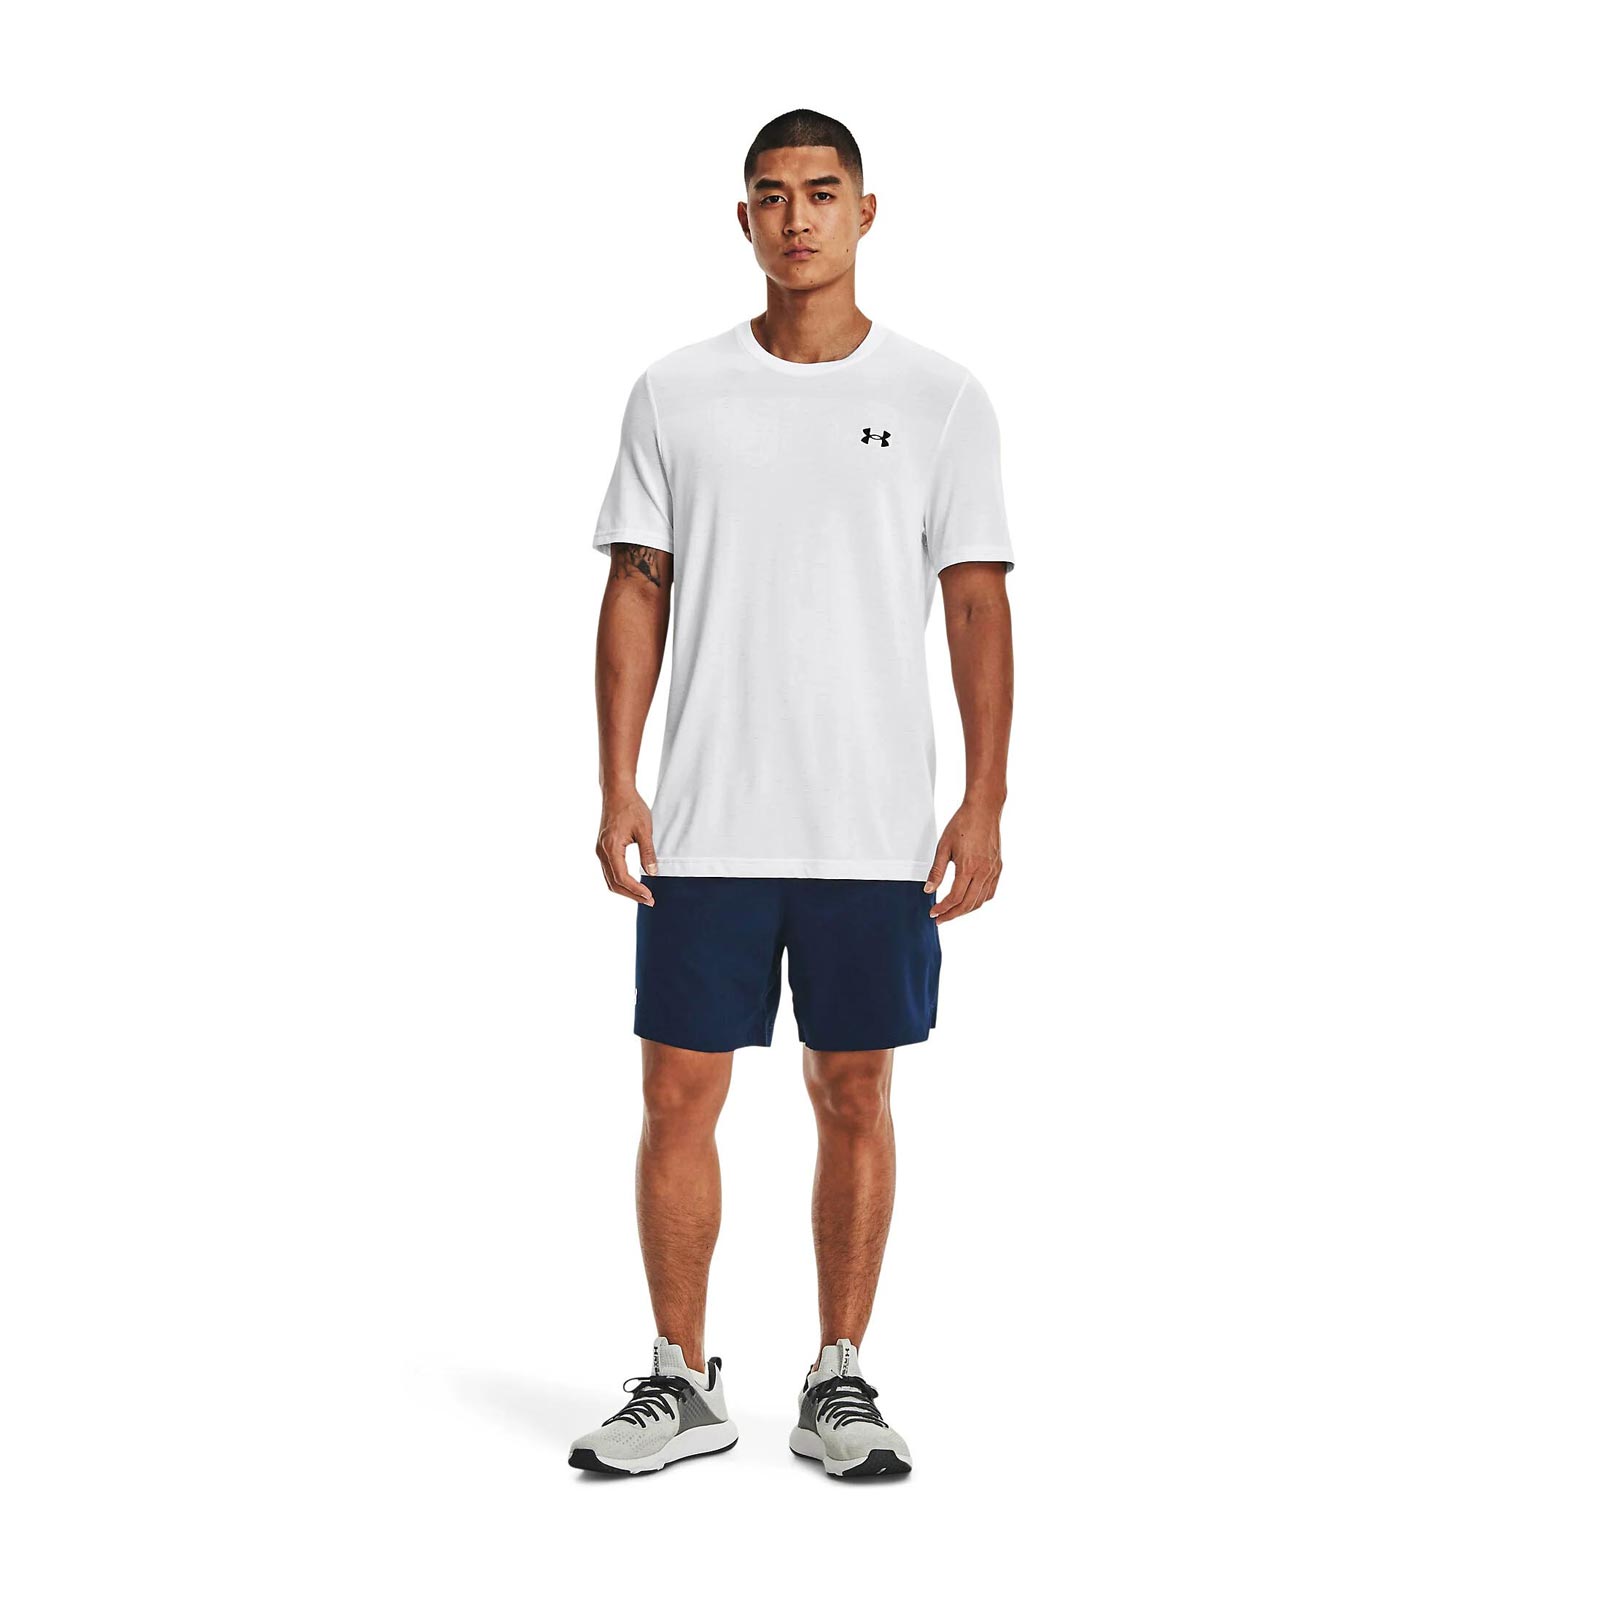 UNDER ARMOUR ELITE WOVEN 6 INCH MENS SHORTS